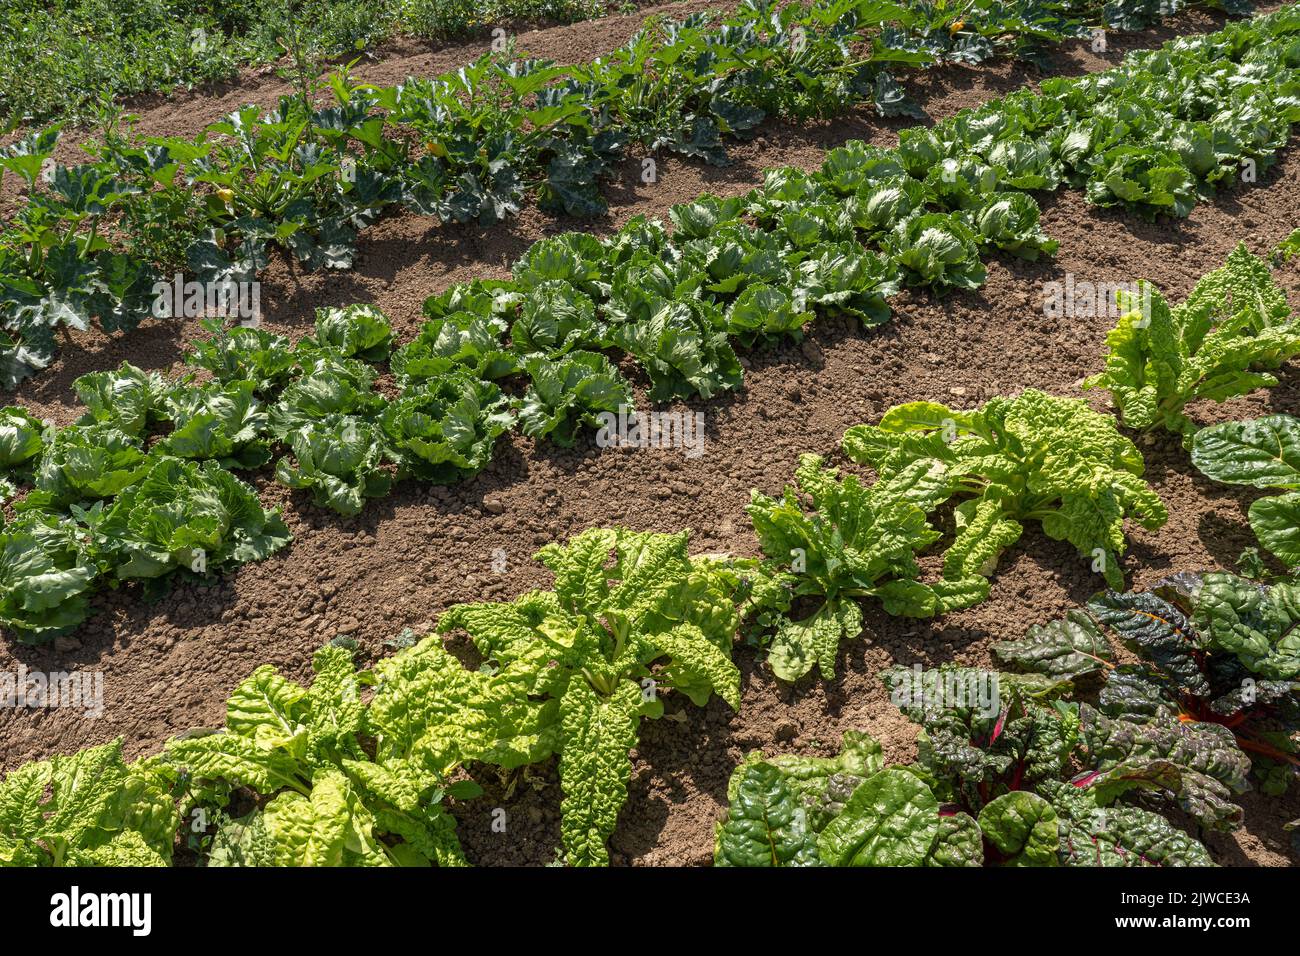 Rows of various vegetable plants and lettuce in brown soil Stock Photo